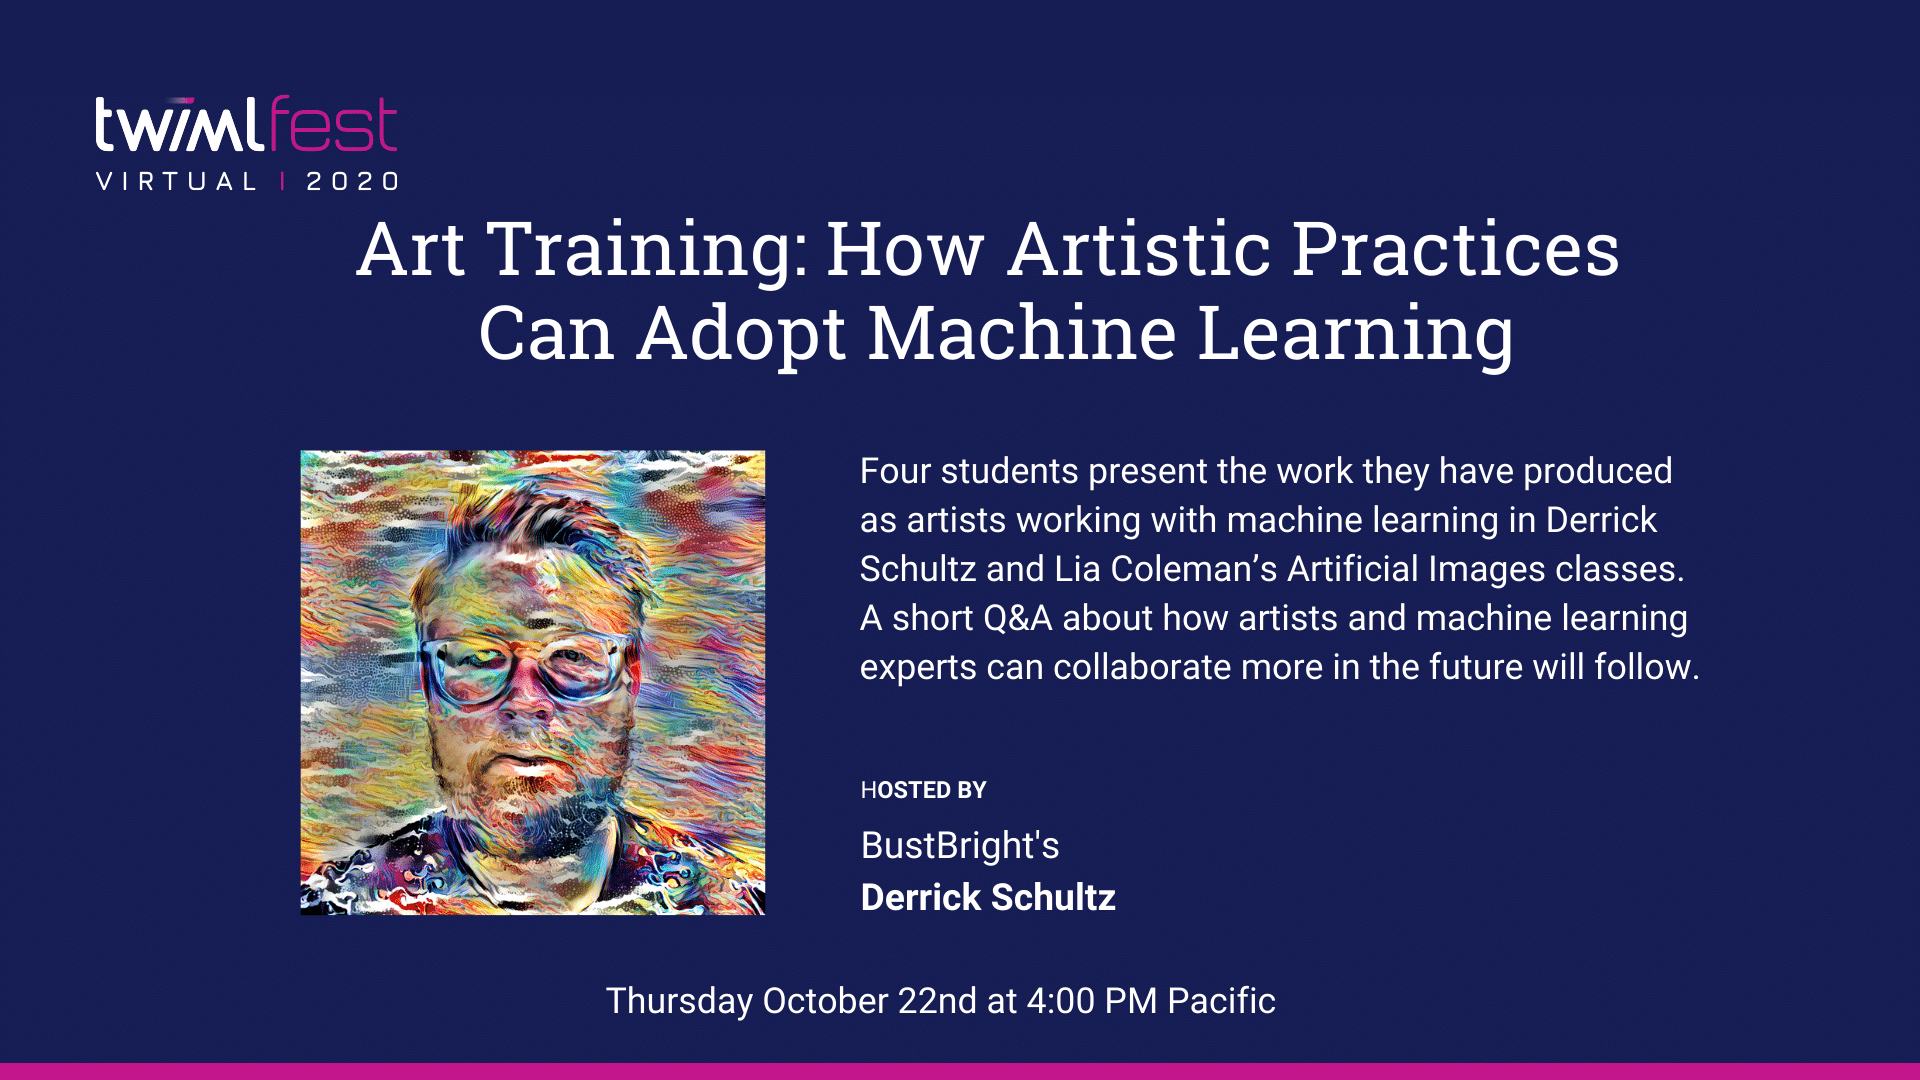 Show & Tell: Art Training: How Artistic Practices Can Adopt Machine Learning